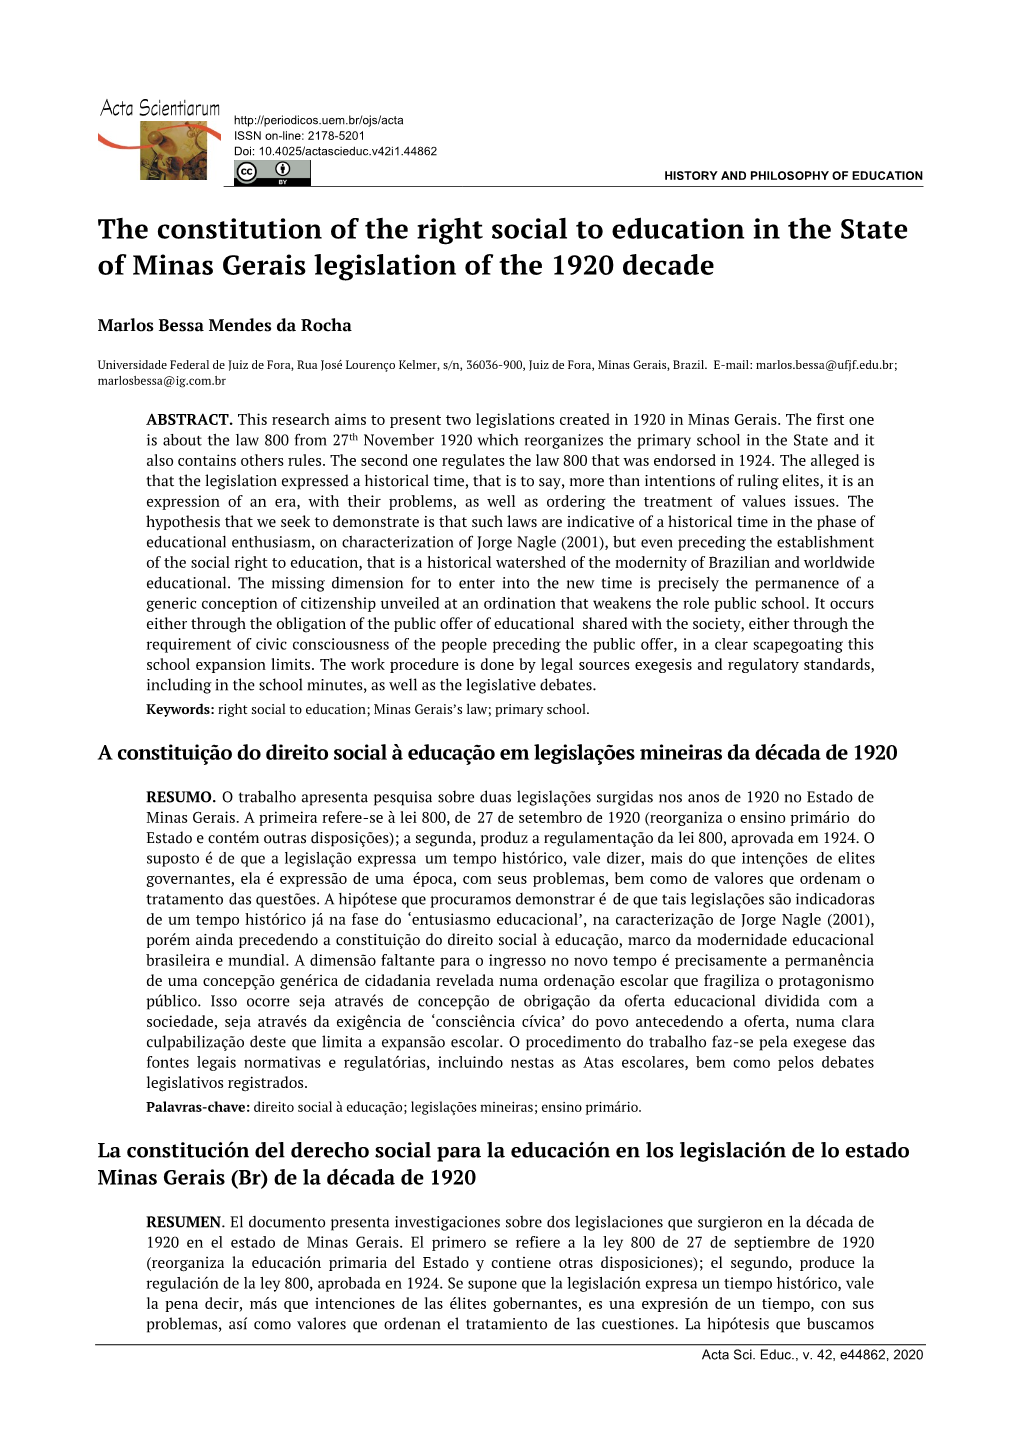 The Constitution of the Right Social to Education in the State of Minas Gerais Legislation of the 1920 Decade